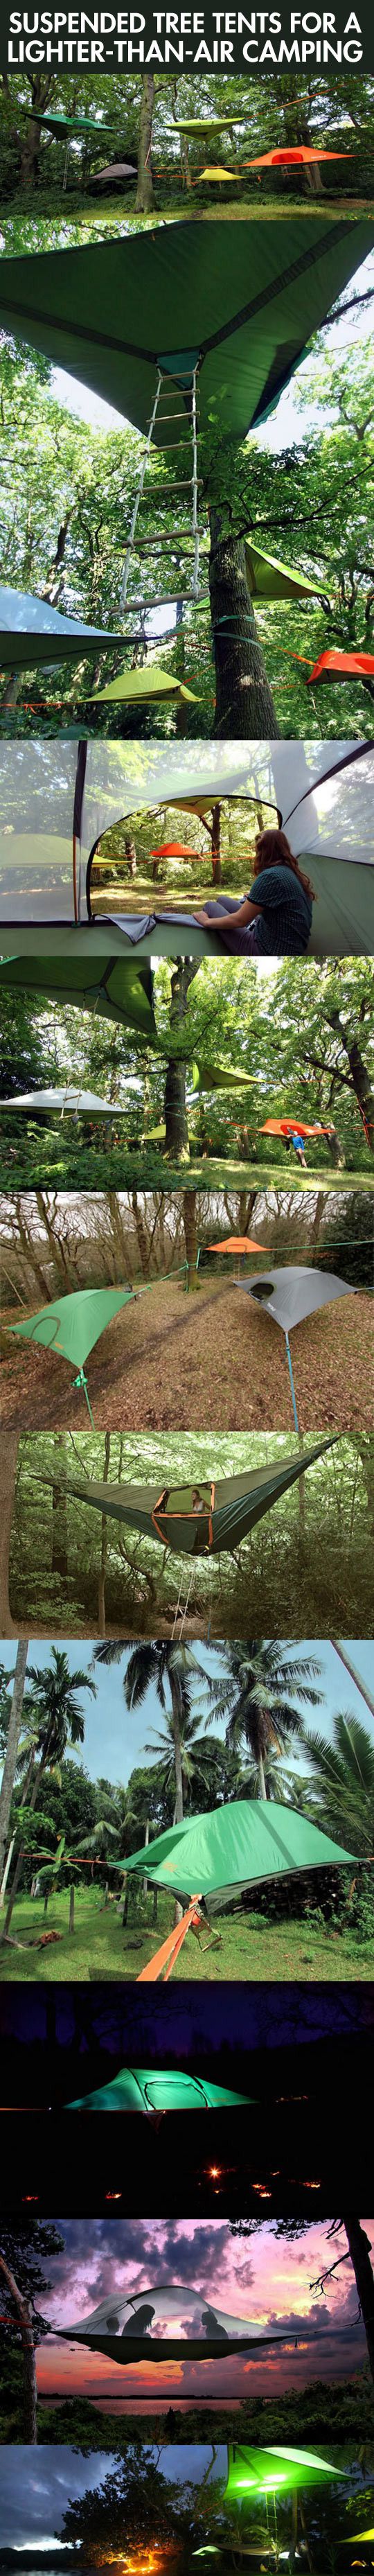 Suspended tree tents!